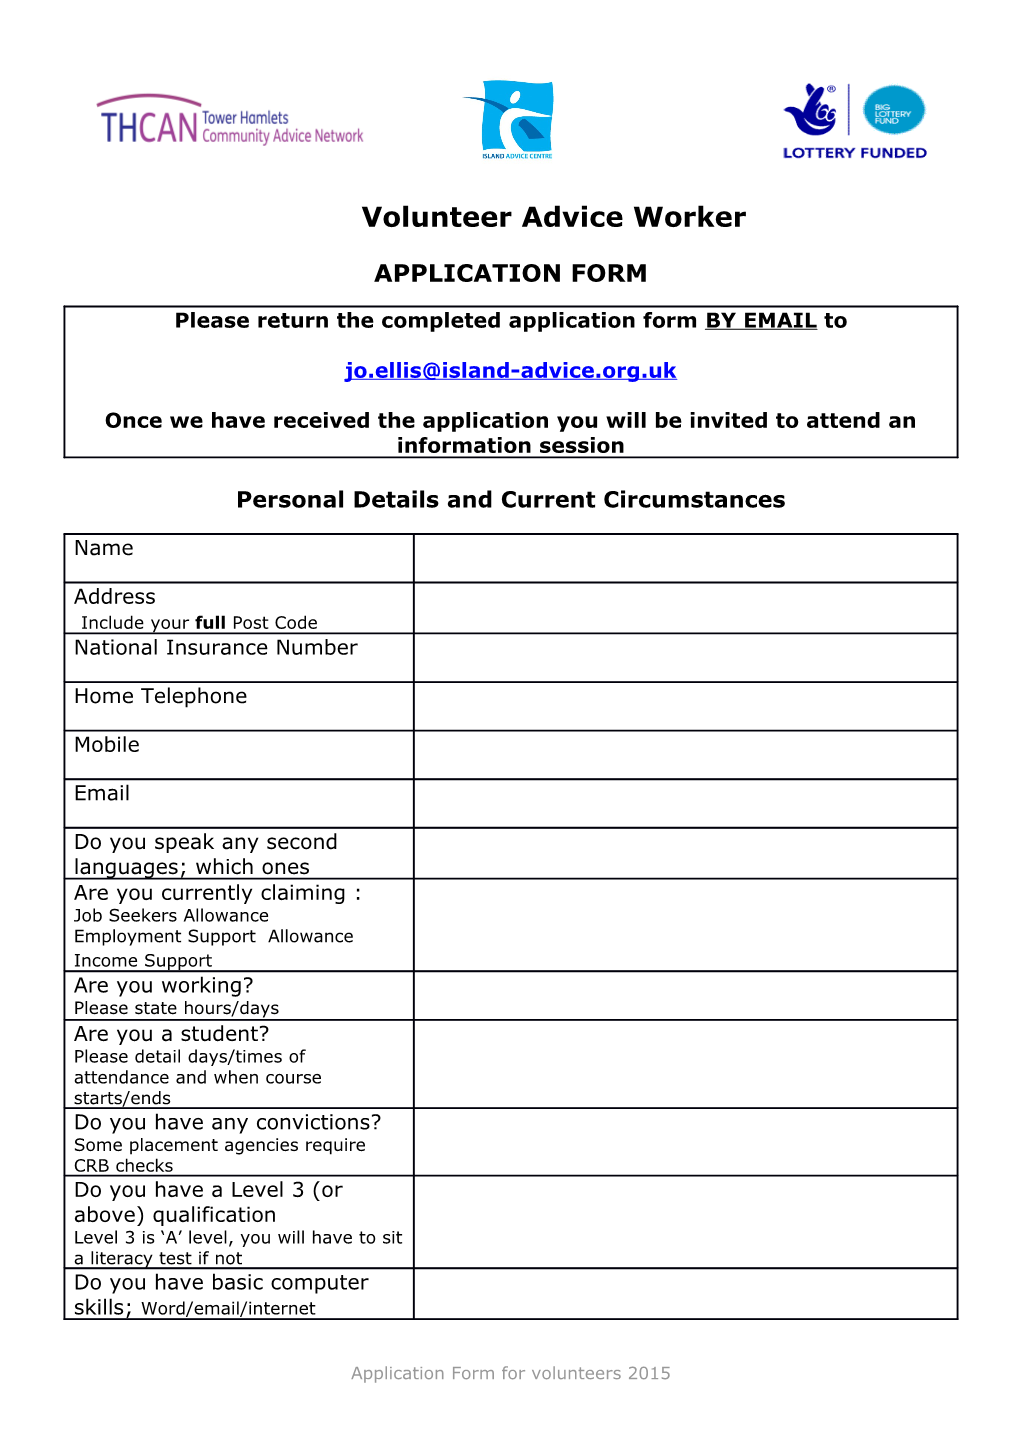 Application Form for Volunteer Advice Workers 2015